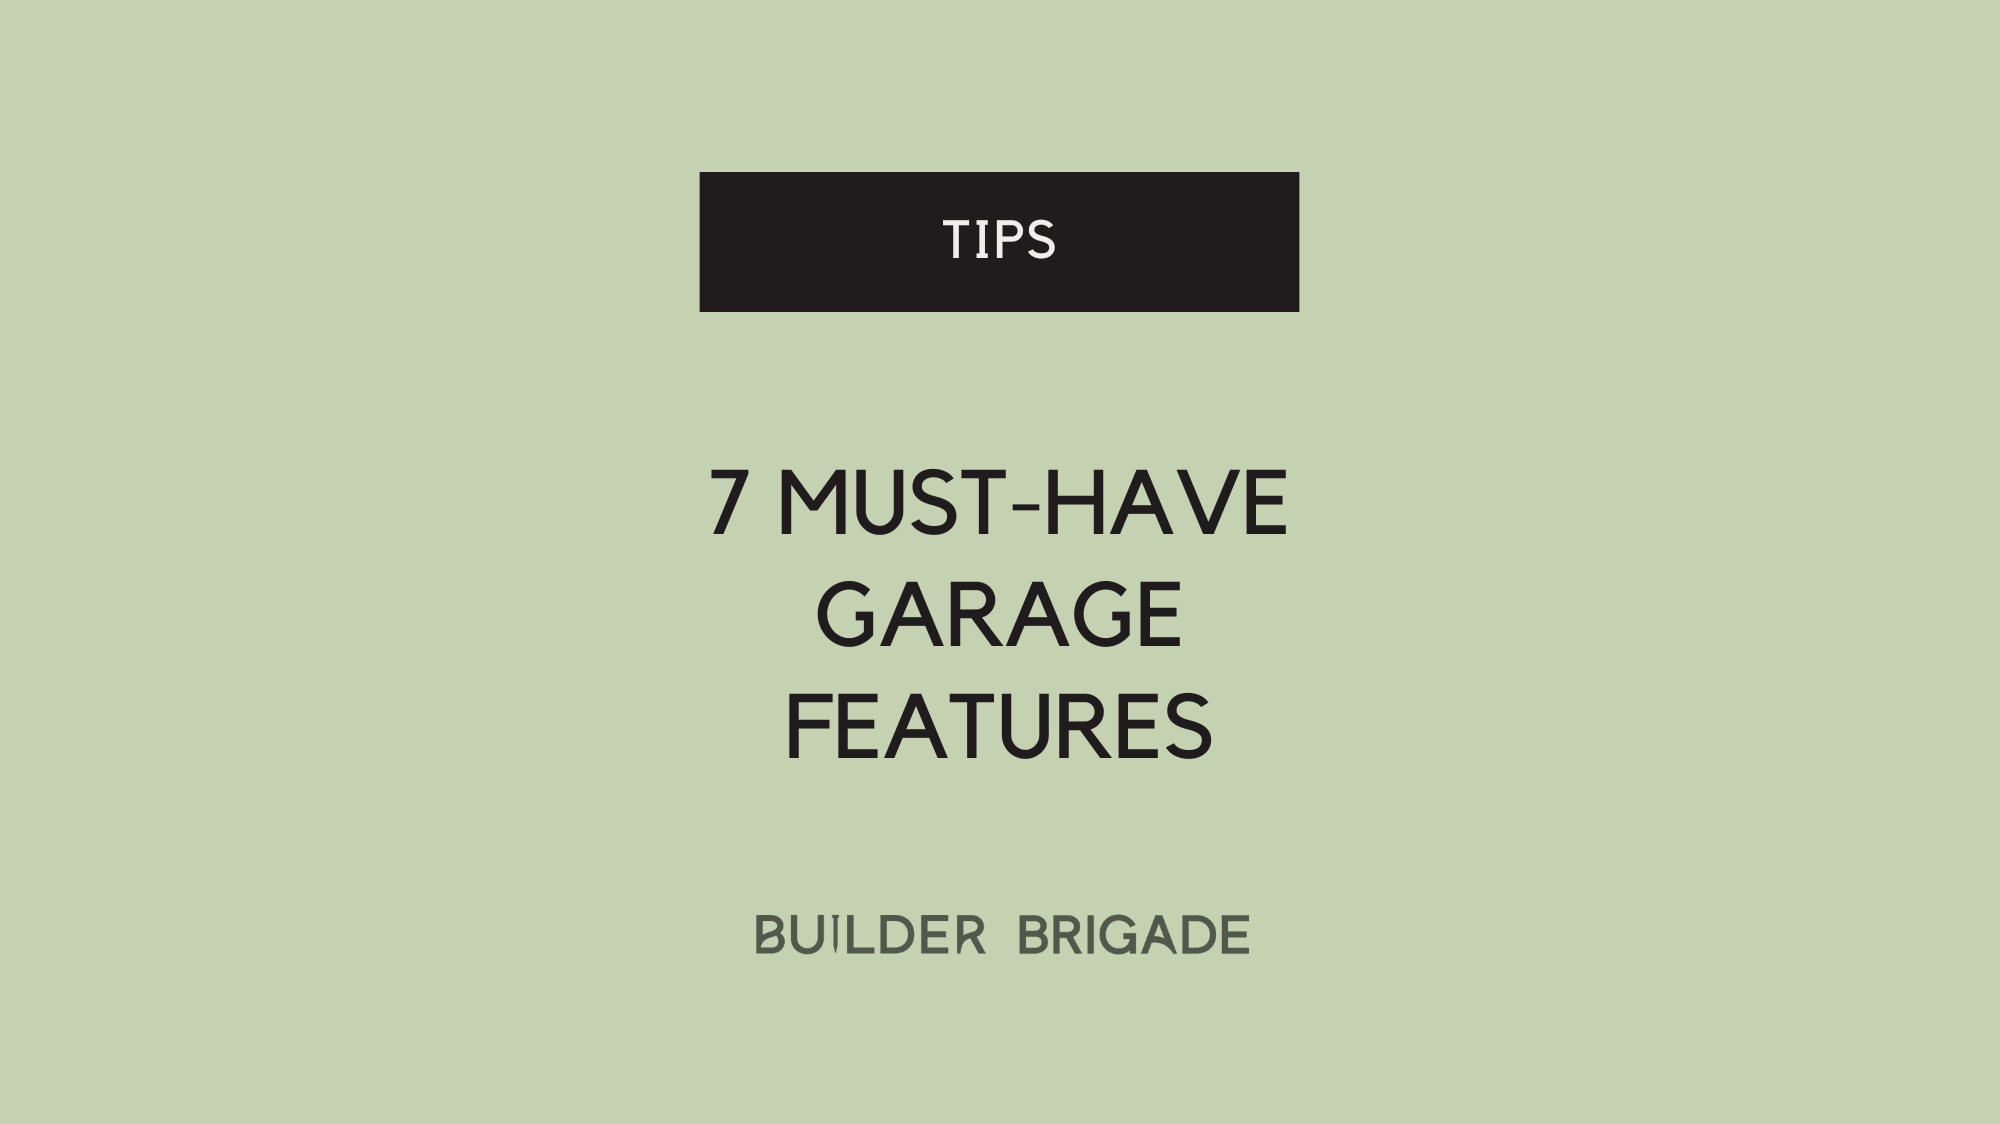 7 must-have garage features